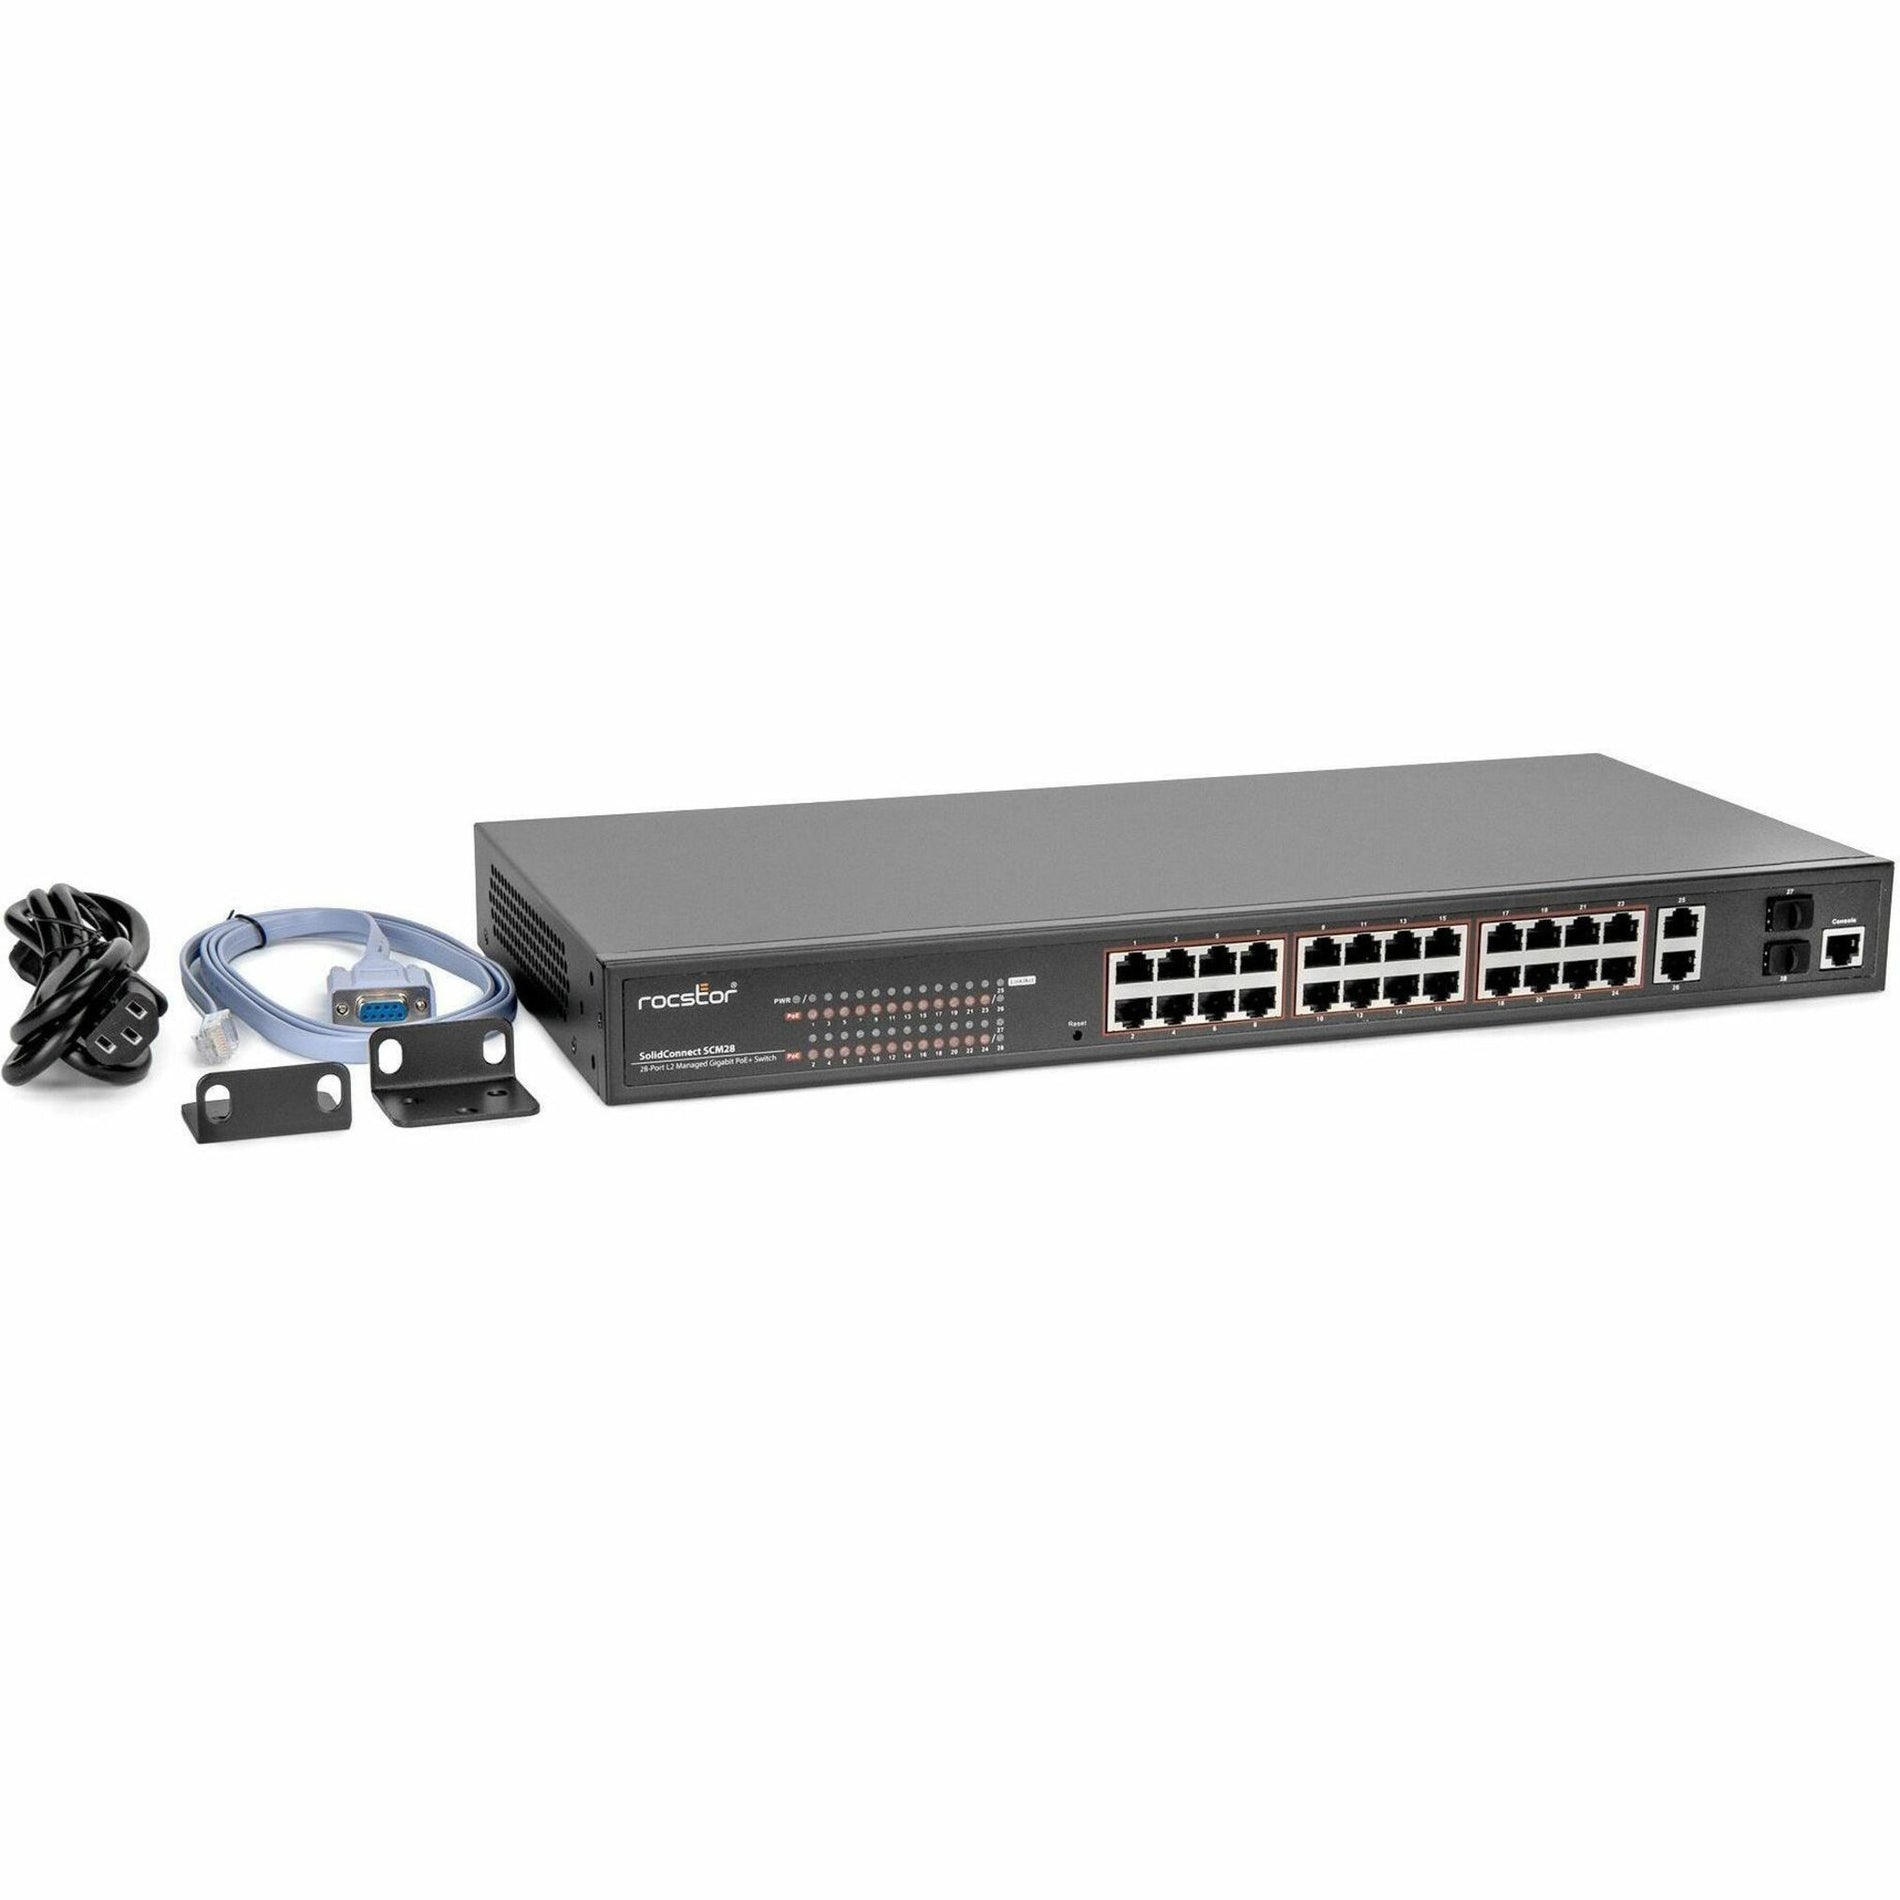 Rocstor Y10S011-B1 SolidConnect SCM28 24-Port PoE+ Gigabit Managed Switch, Industrial Network Government